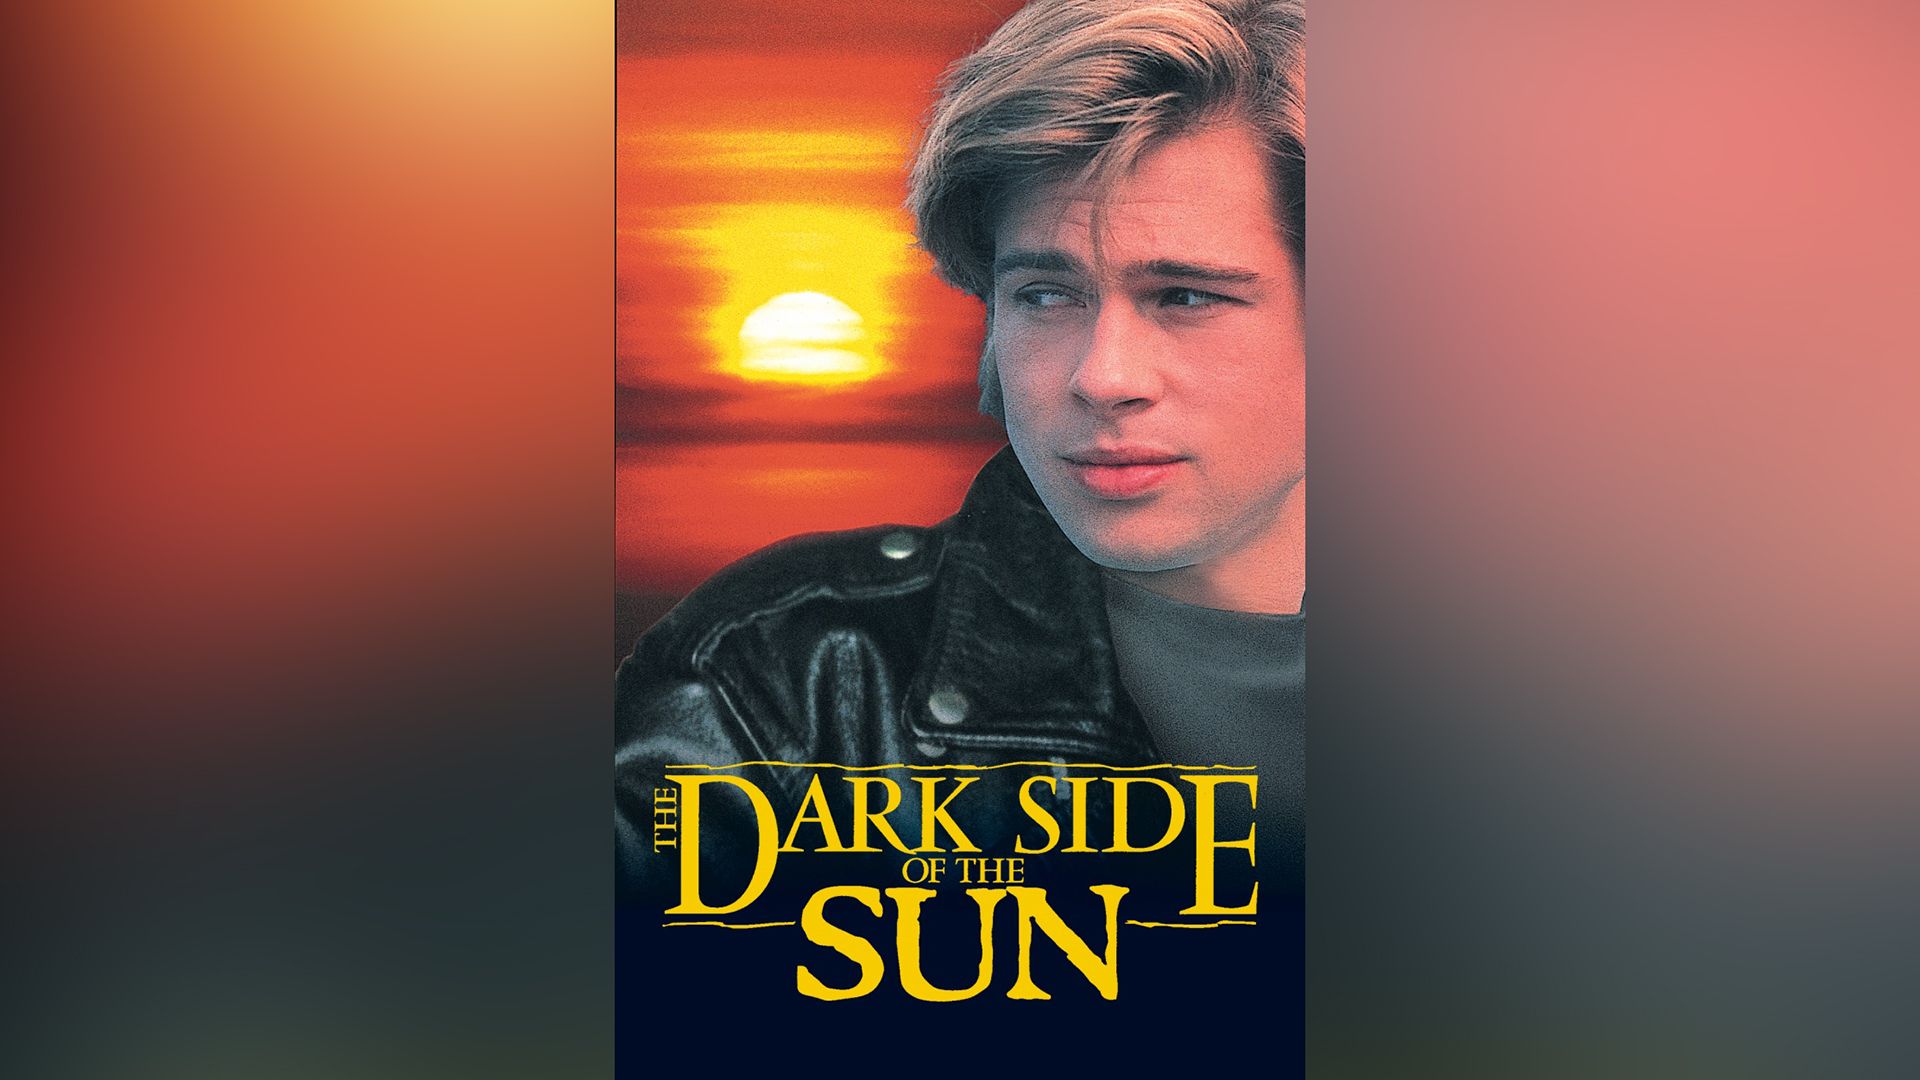 The first feature film starring Brad Pitt, 'The Dark Side of the Sun'